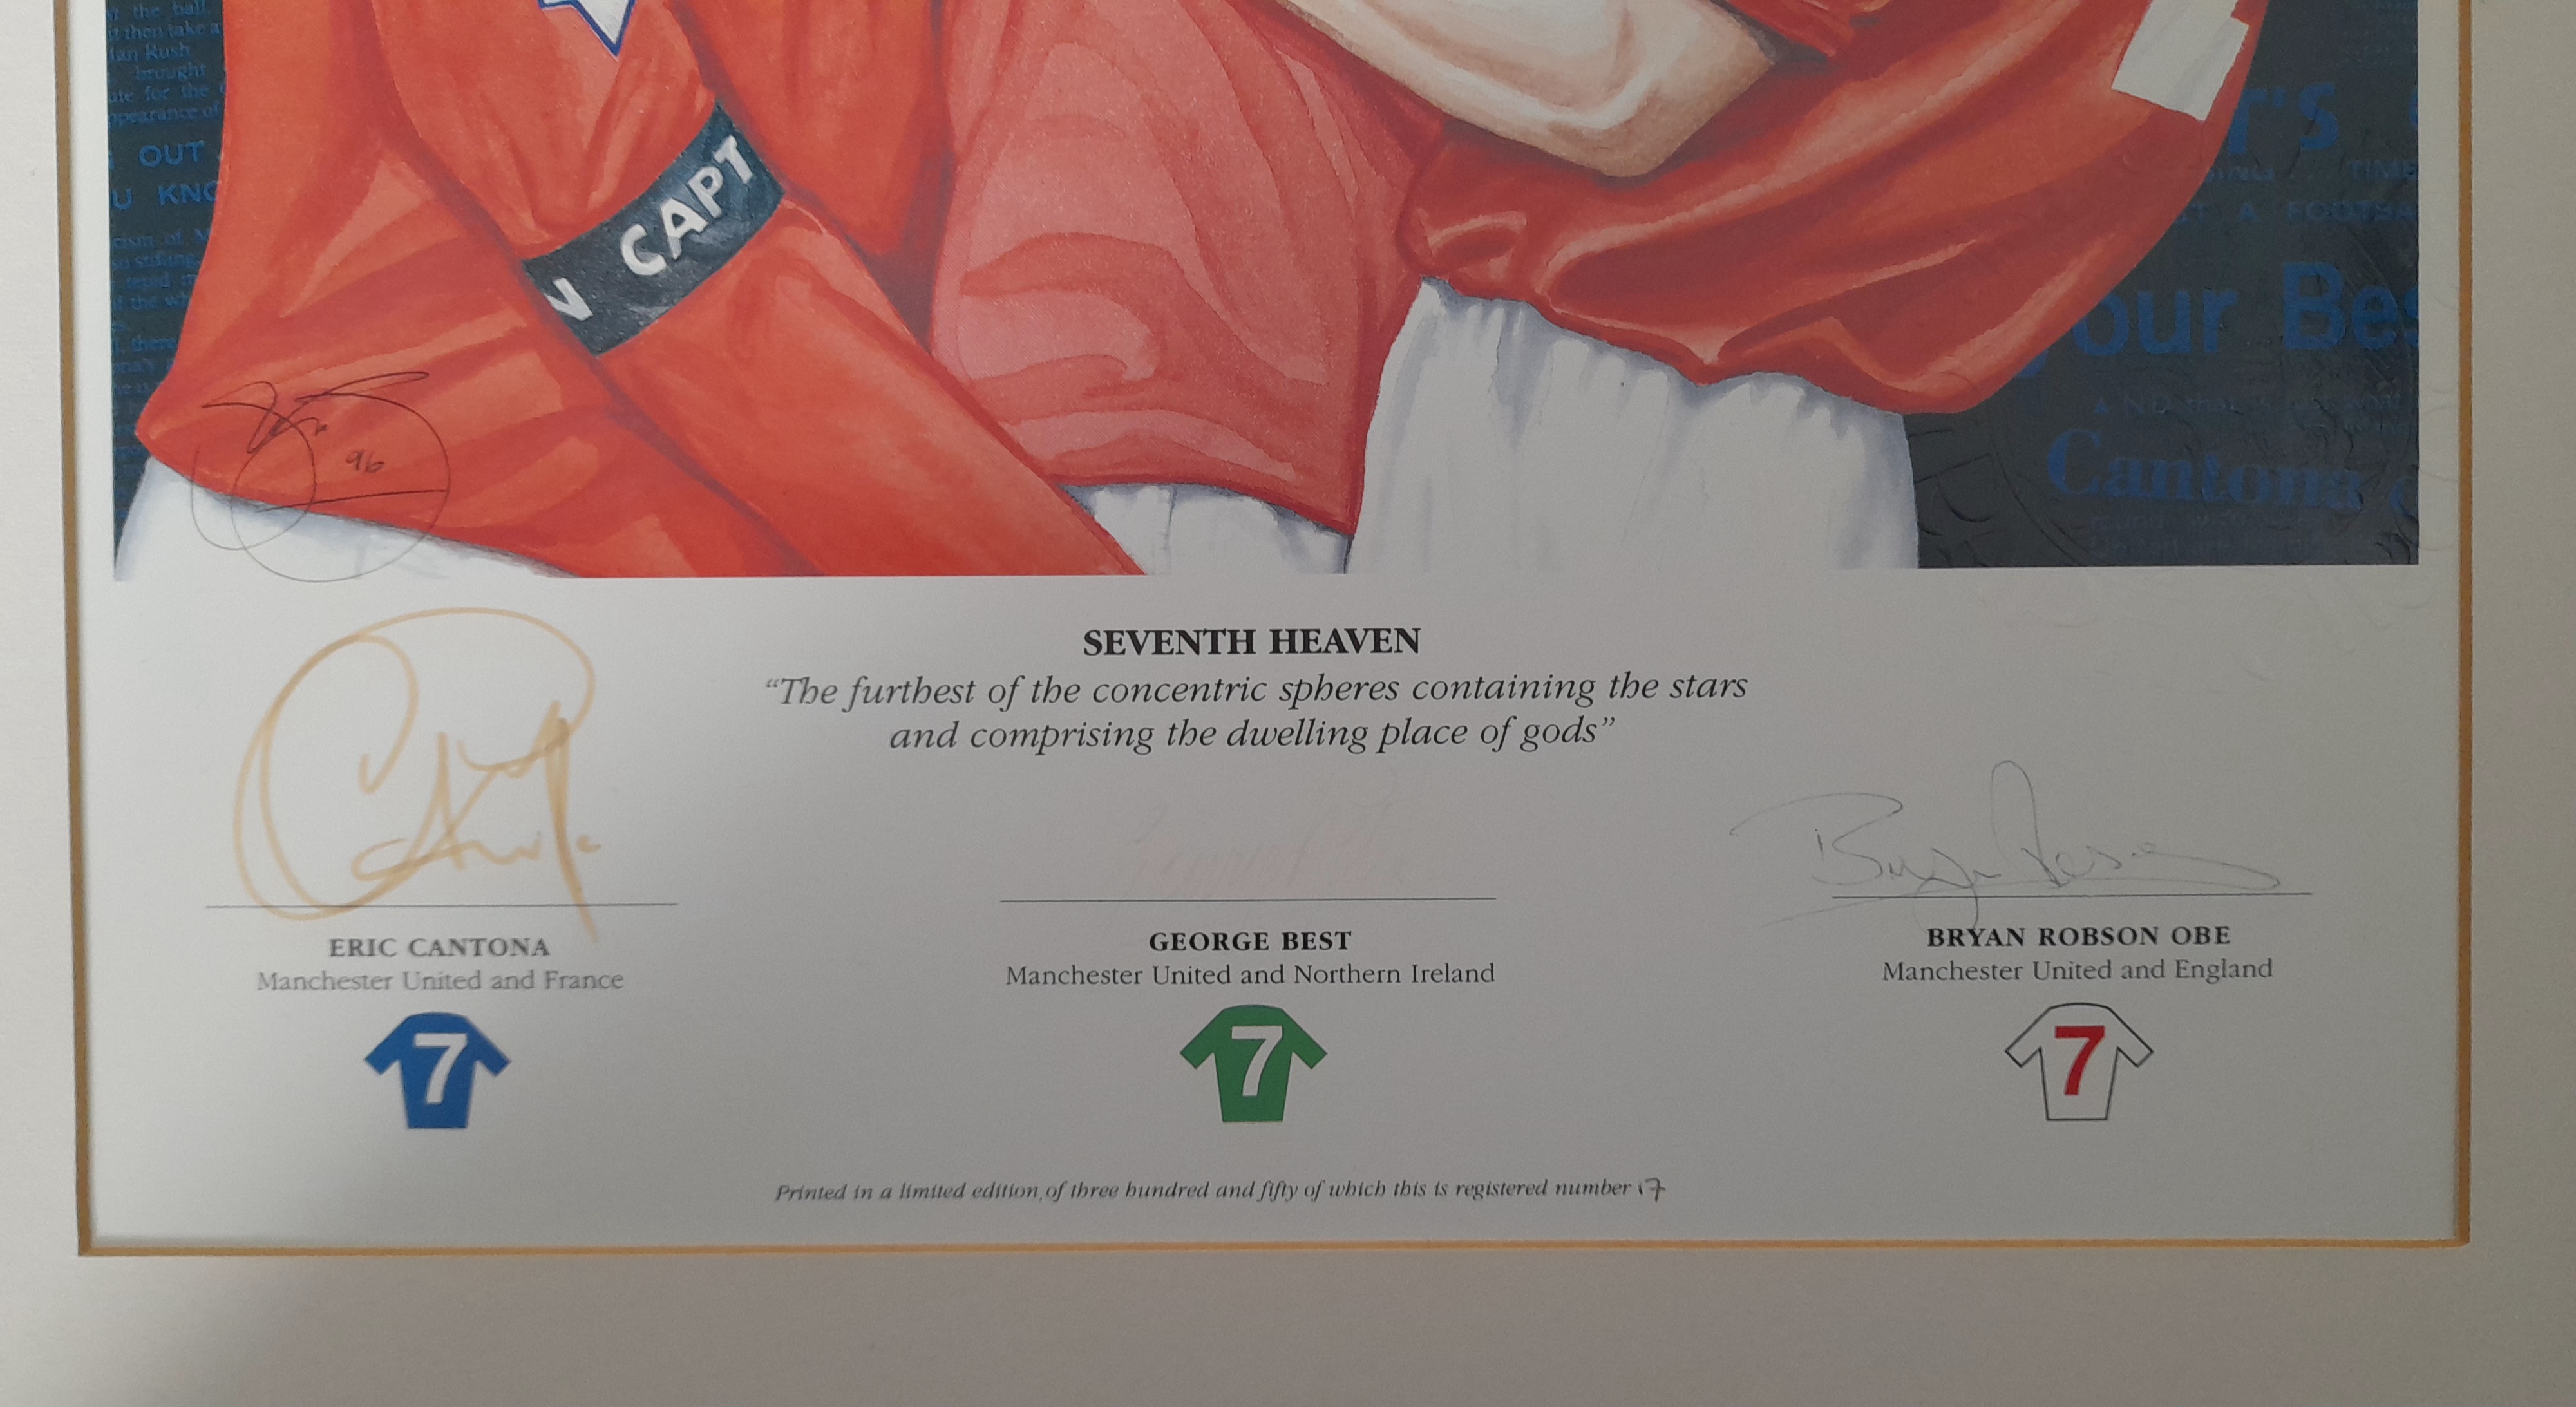 MANCHESTER UNITED SEVENTH HEAVEN LITHOGRAPH SIGNED BY ERIC CANTONA, GEORGE BEST & BRYAN ROBSON - Image 3 of 5